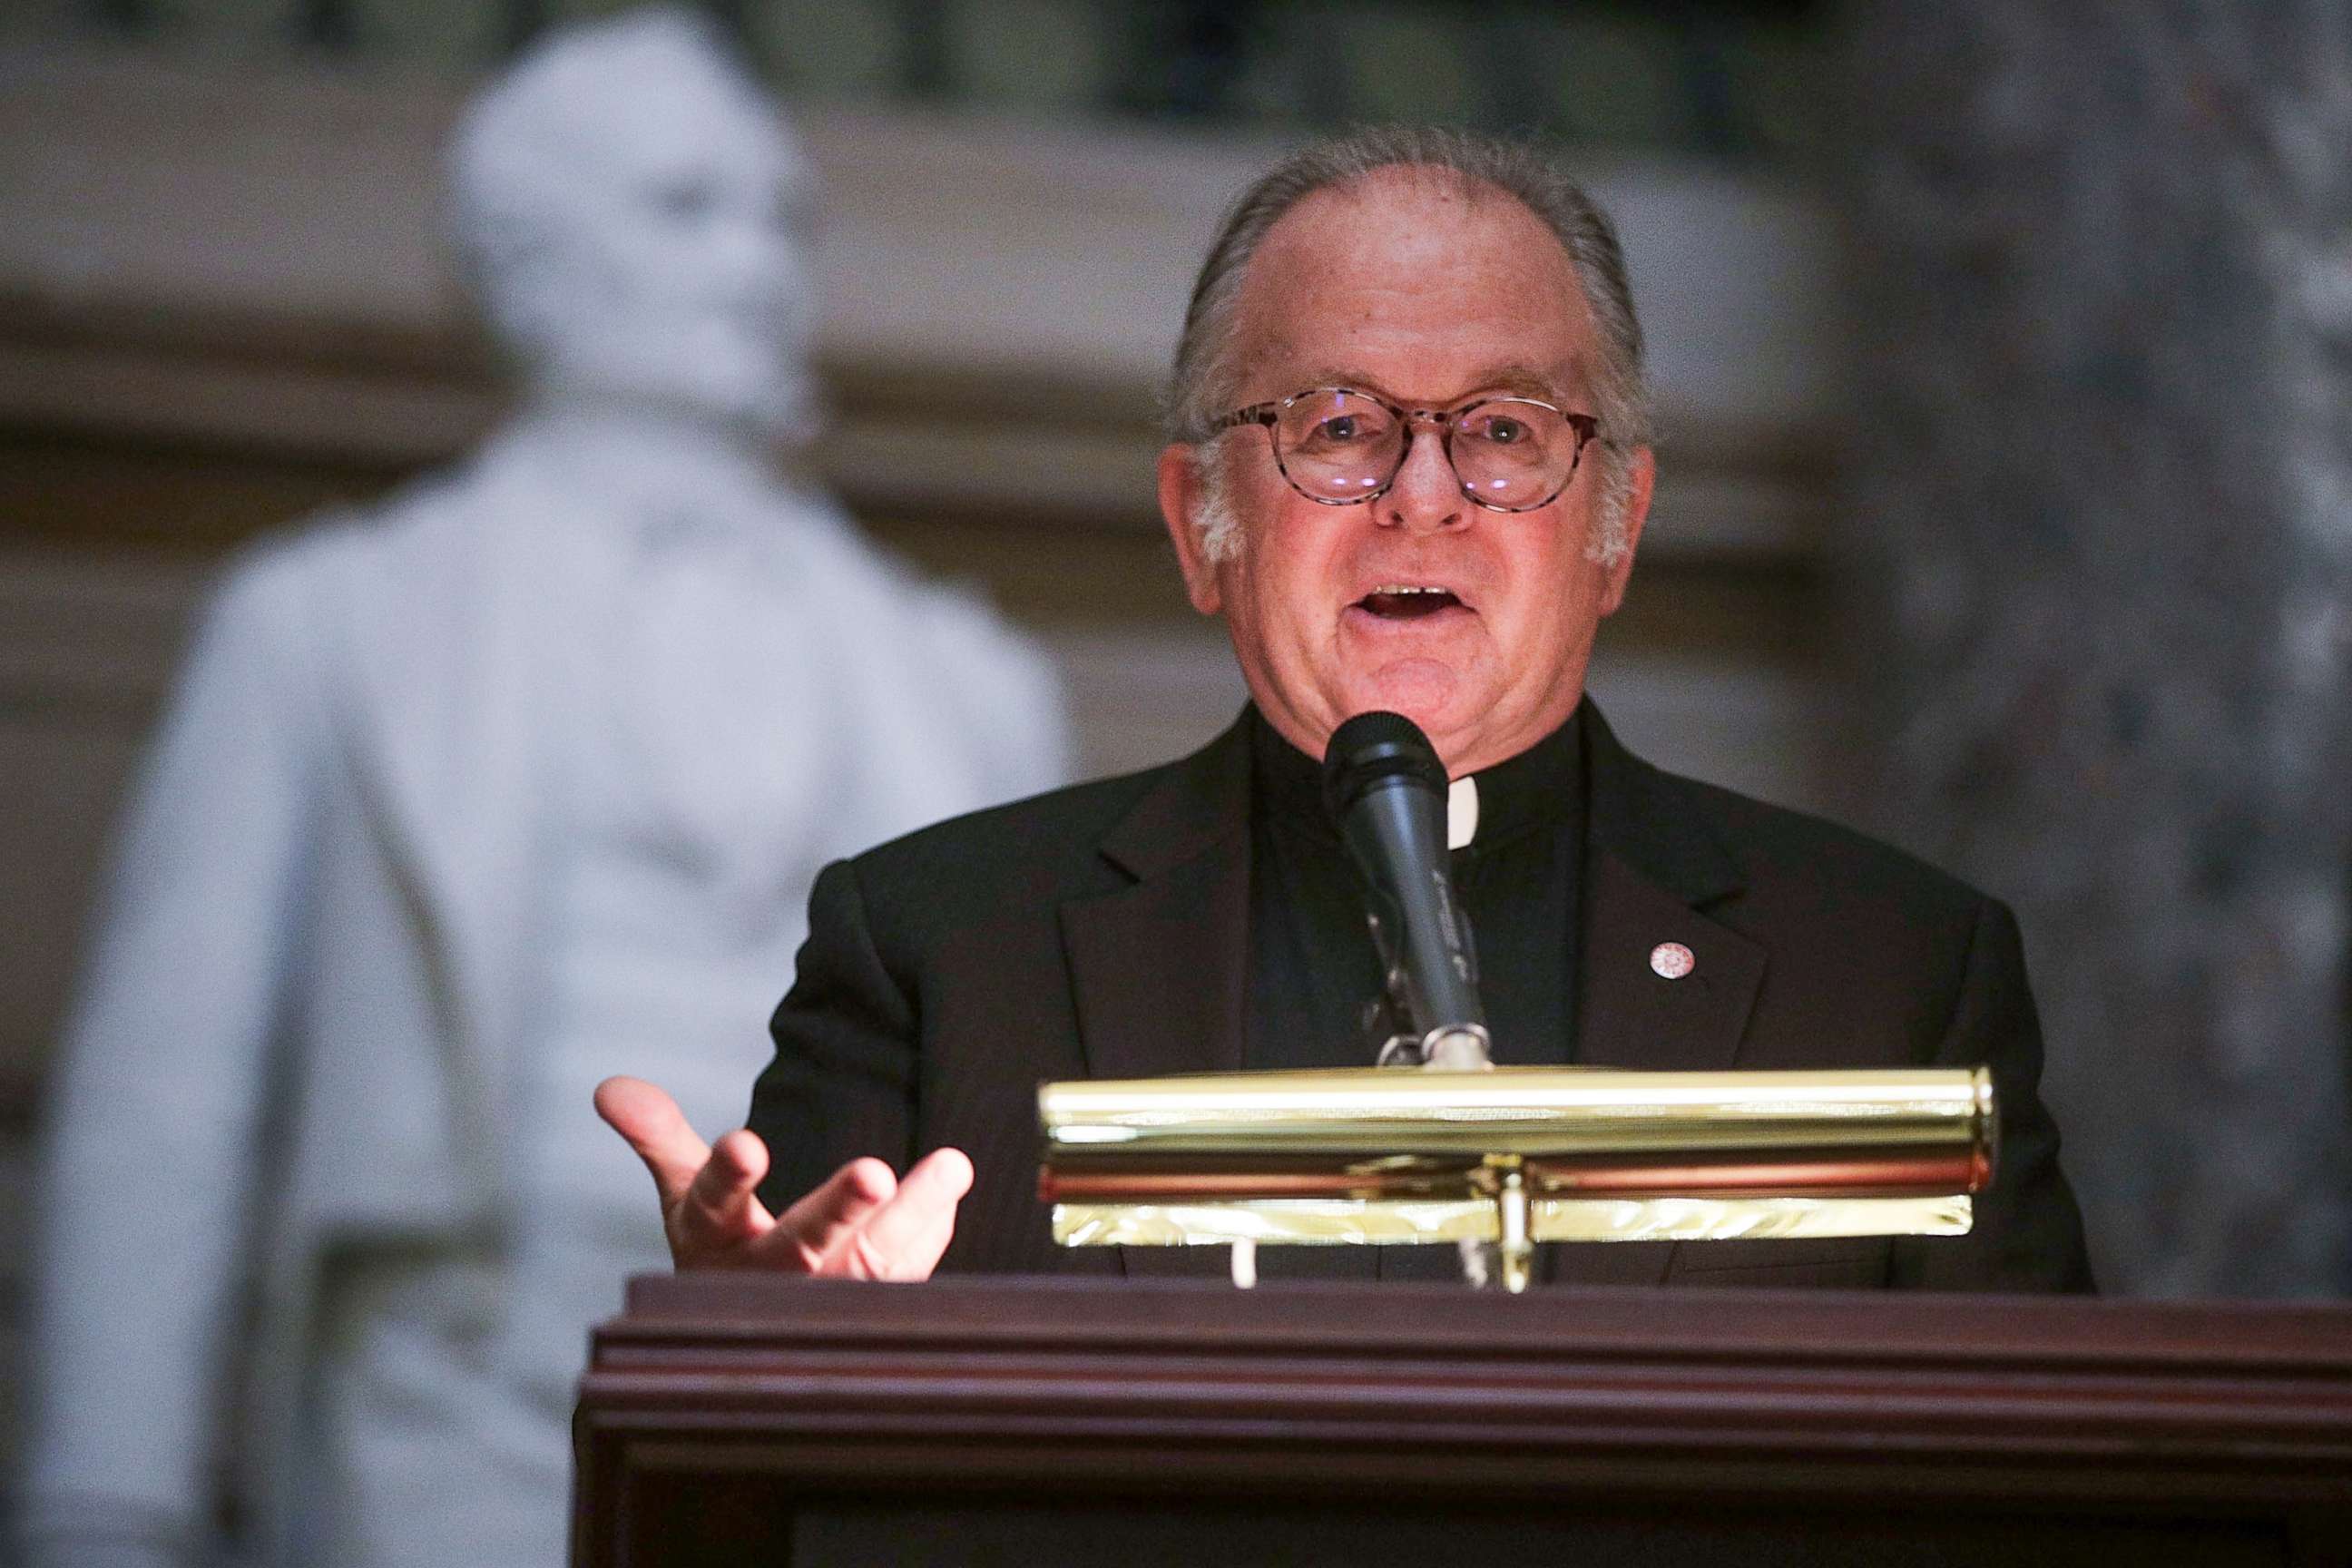 PHOTO: Father Patrick Conroy speaks during a memorial service at the National Statuary Hall of the Capitol Sept. 27, 2017, in Washington.